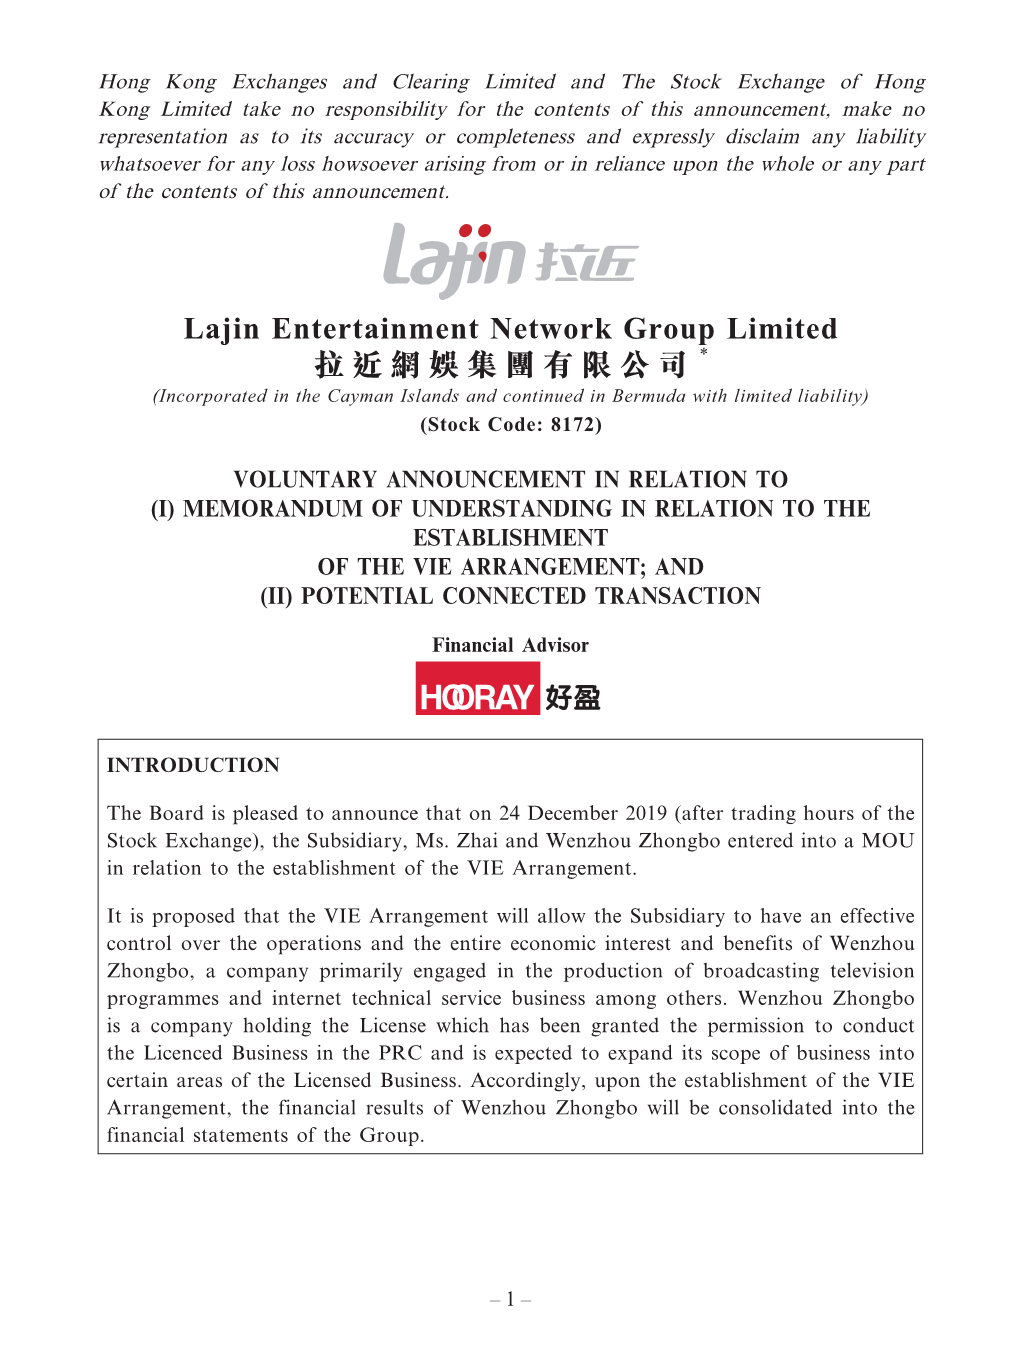 Lajin Entertainment Network Group Limited 拉近網娛集團有限公司 * (Incorporated in the Cayman Islands and Continued in Bermuda with Limited Liability) (Stock Code: 8172)